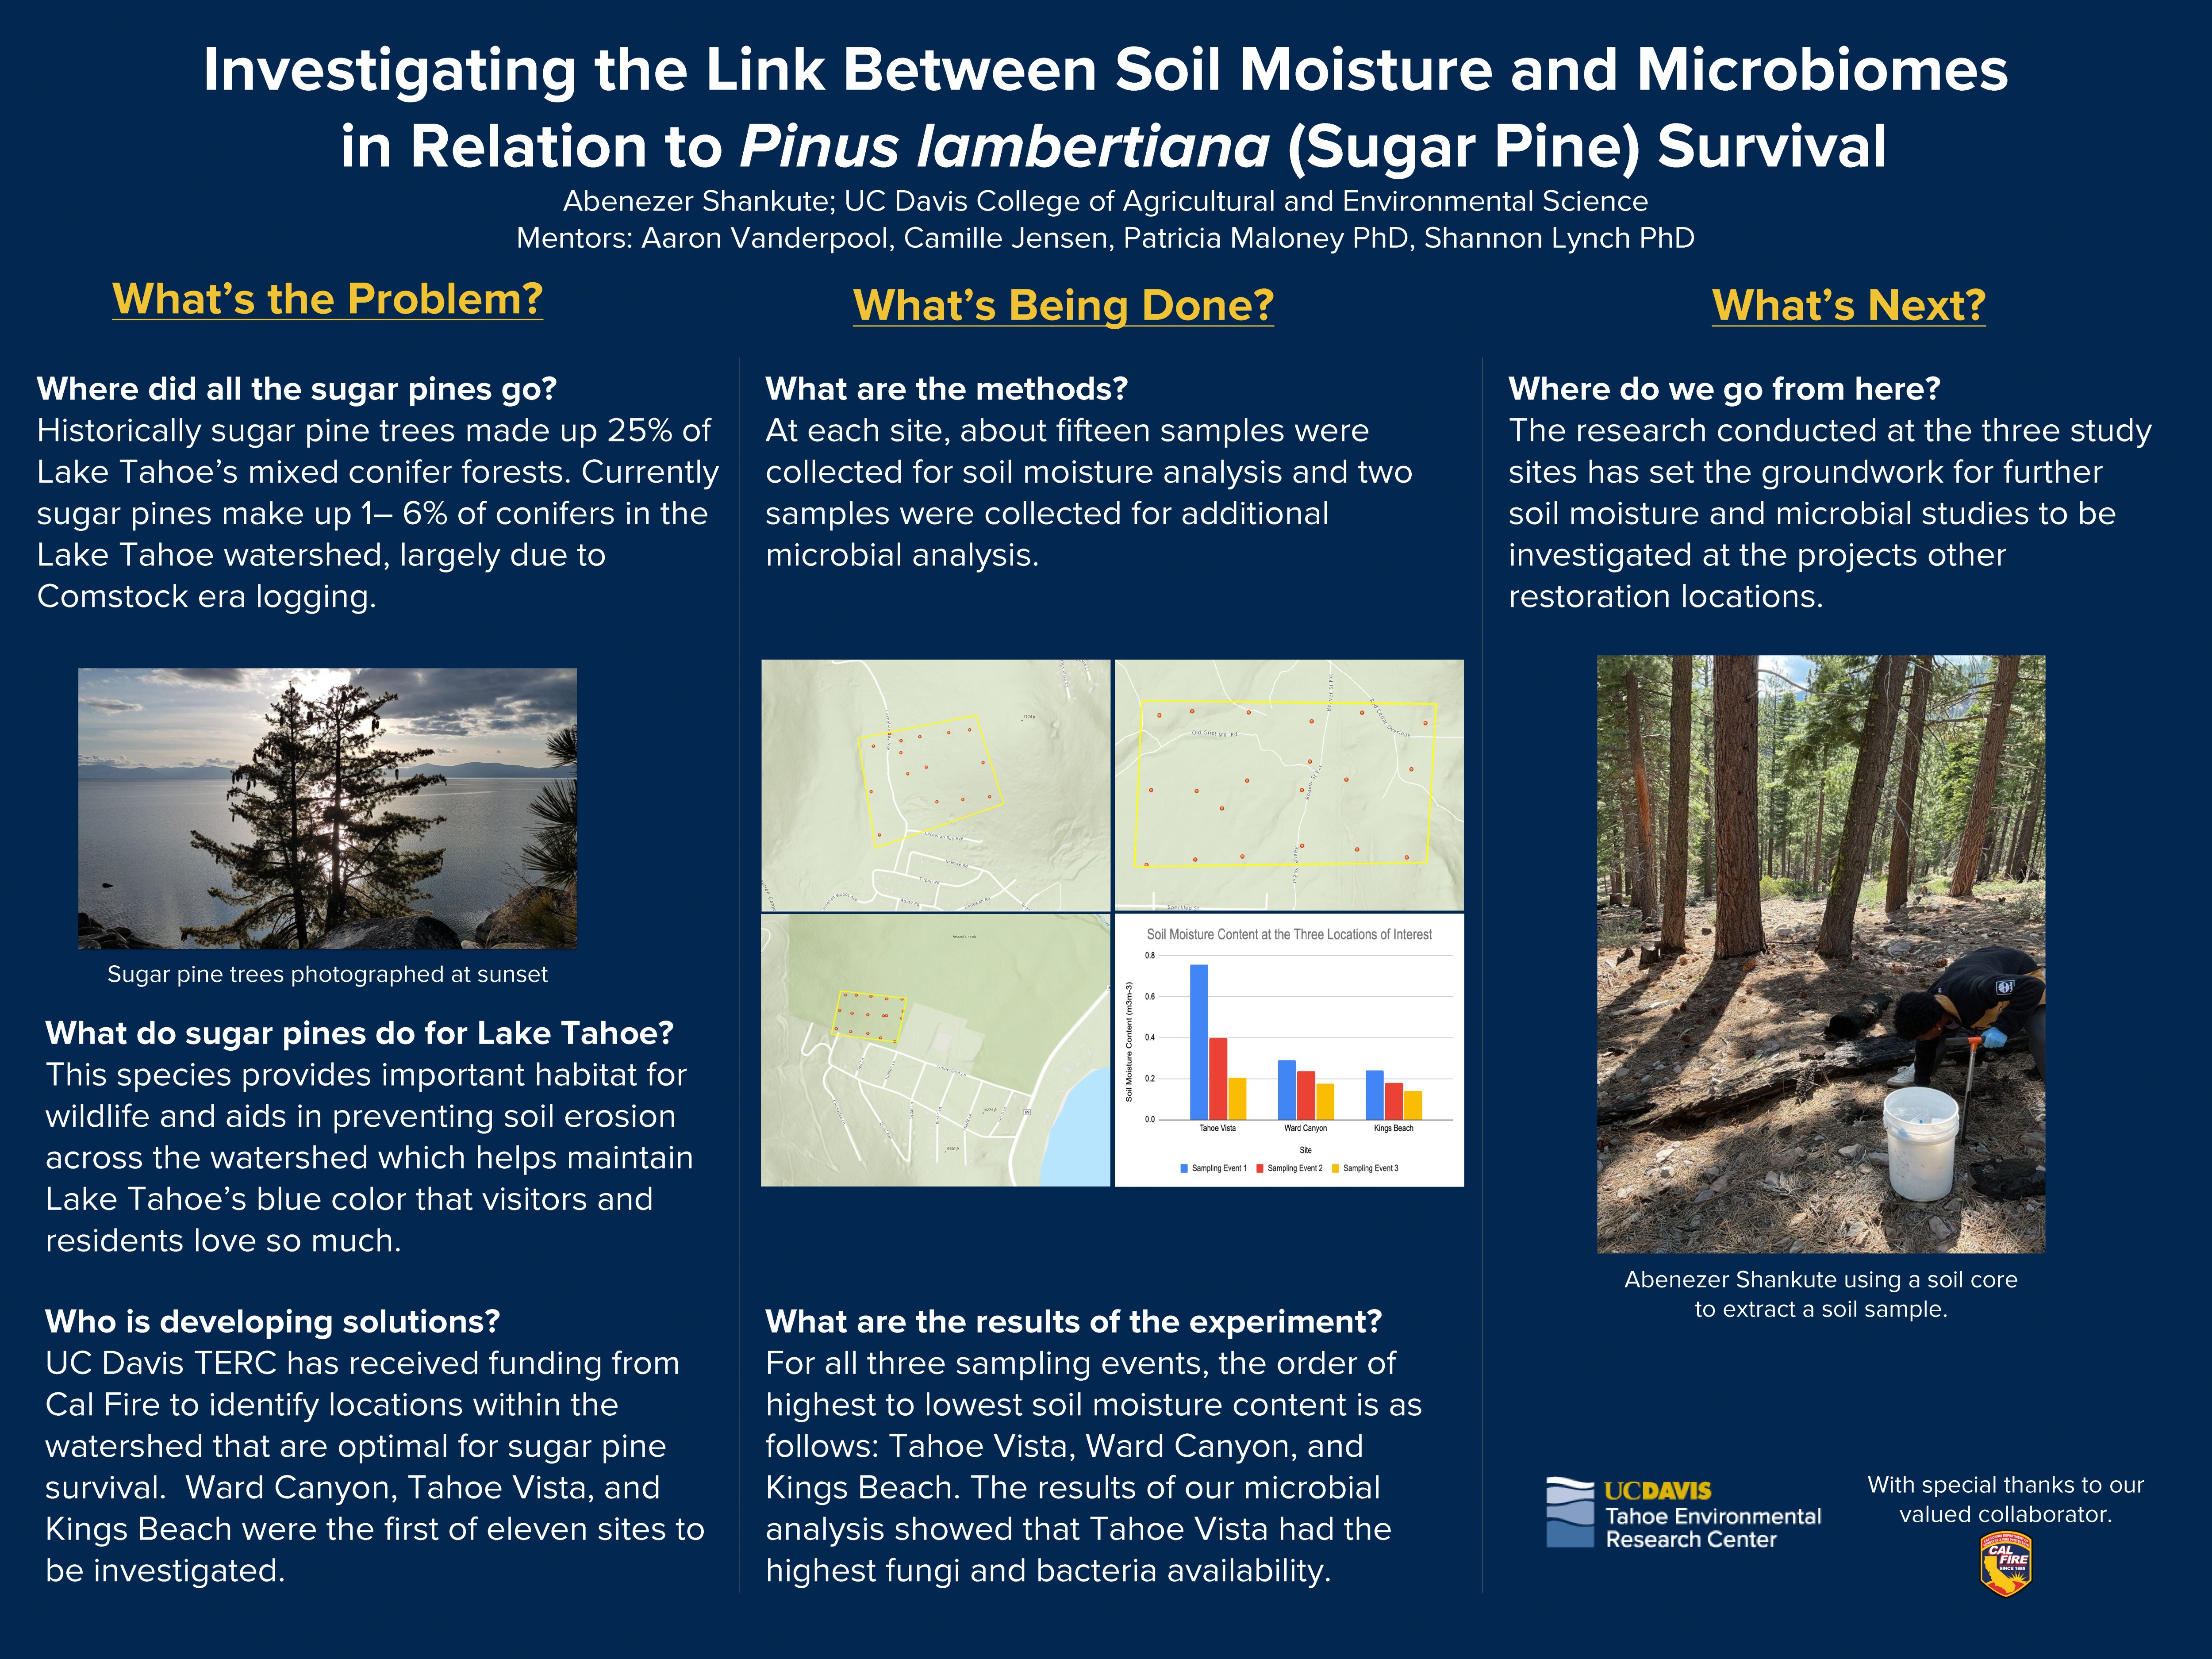 Investigating the link between soil moisture and microbiomes in relationship to sugar pine survival